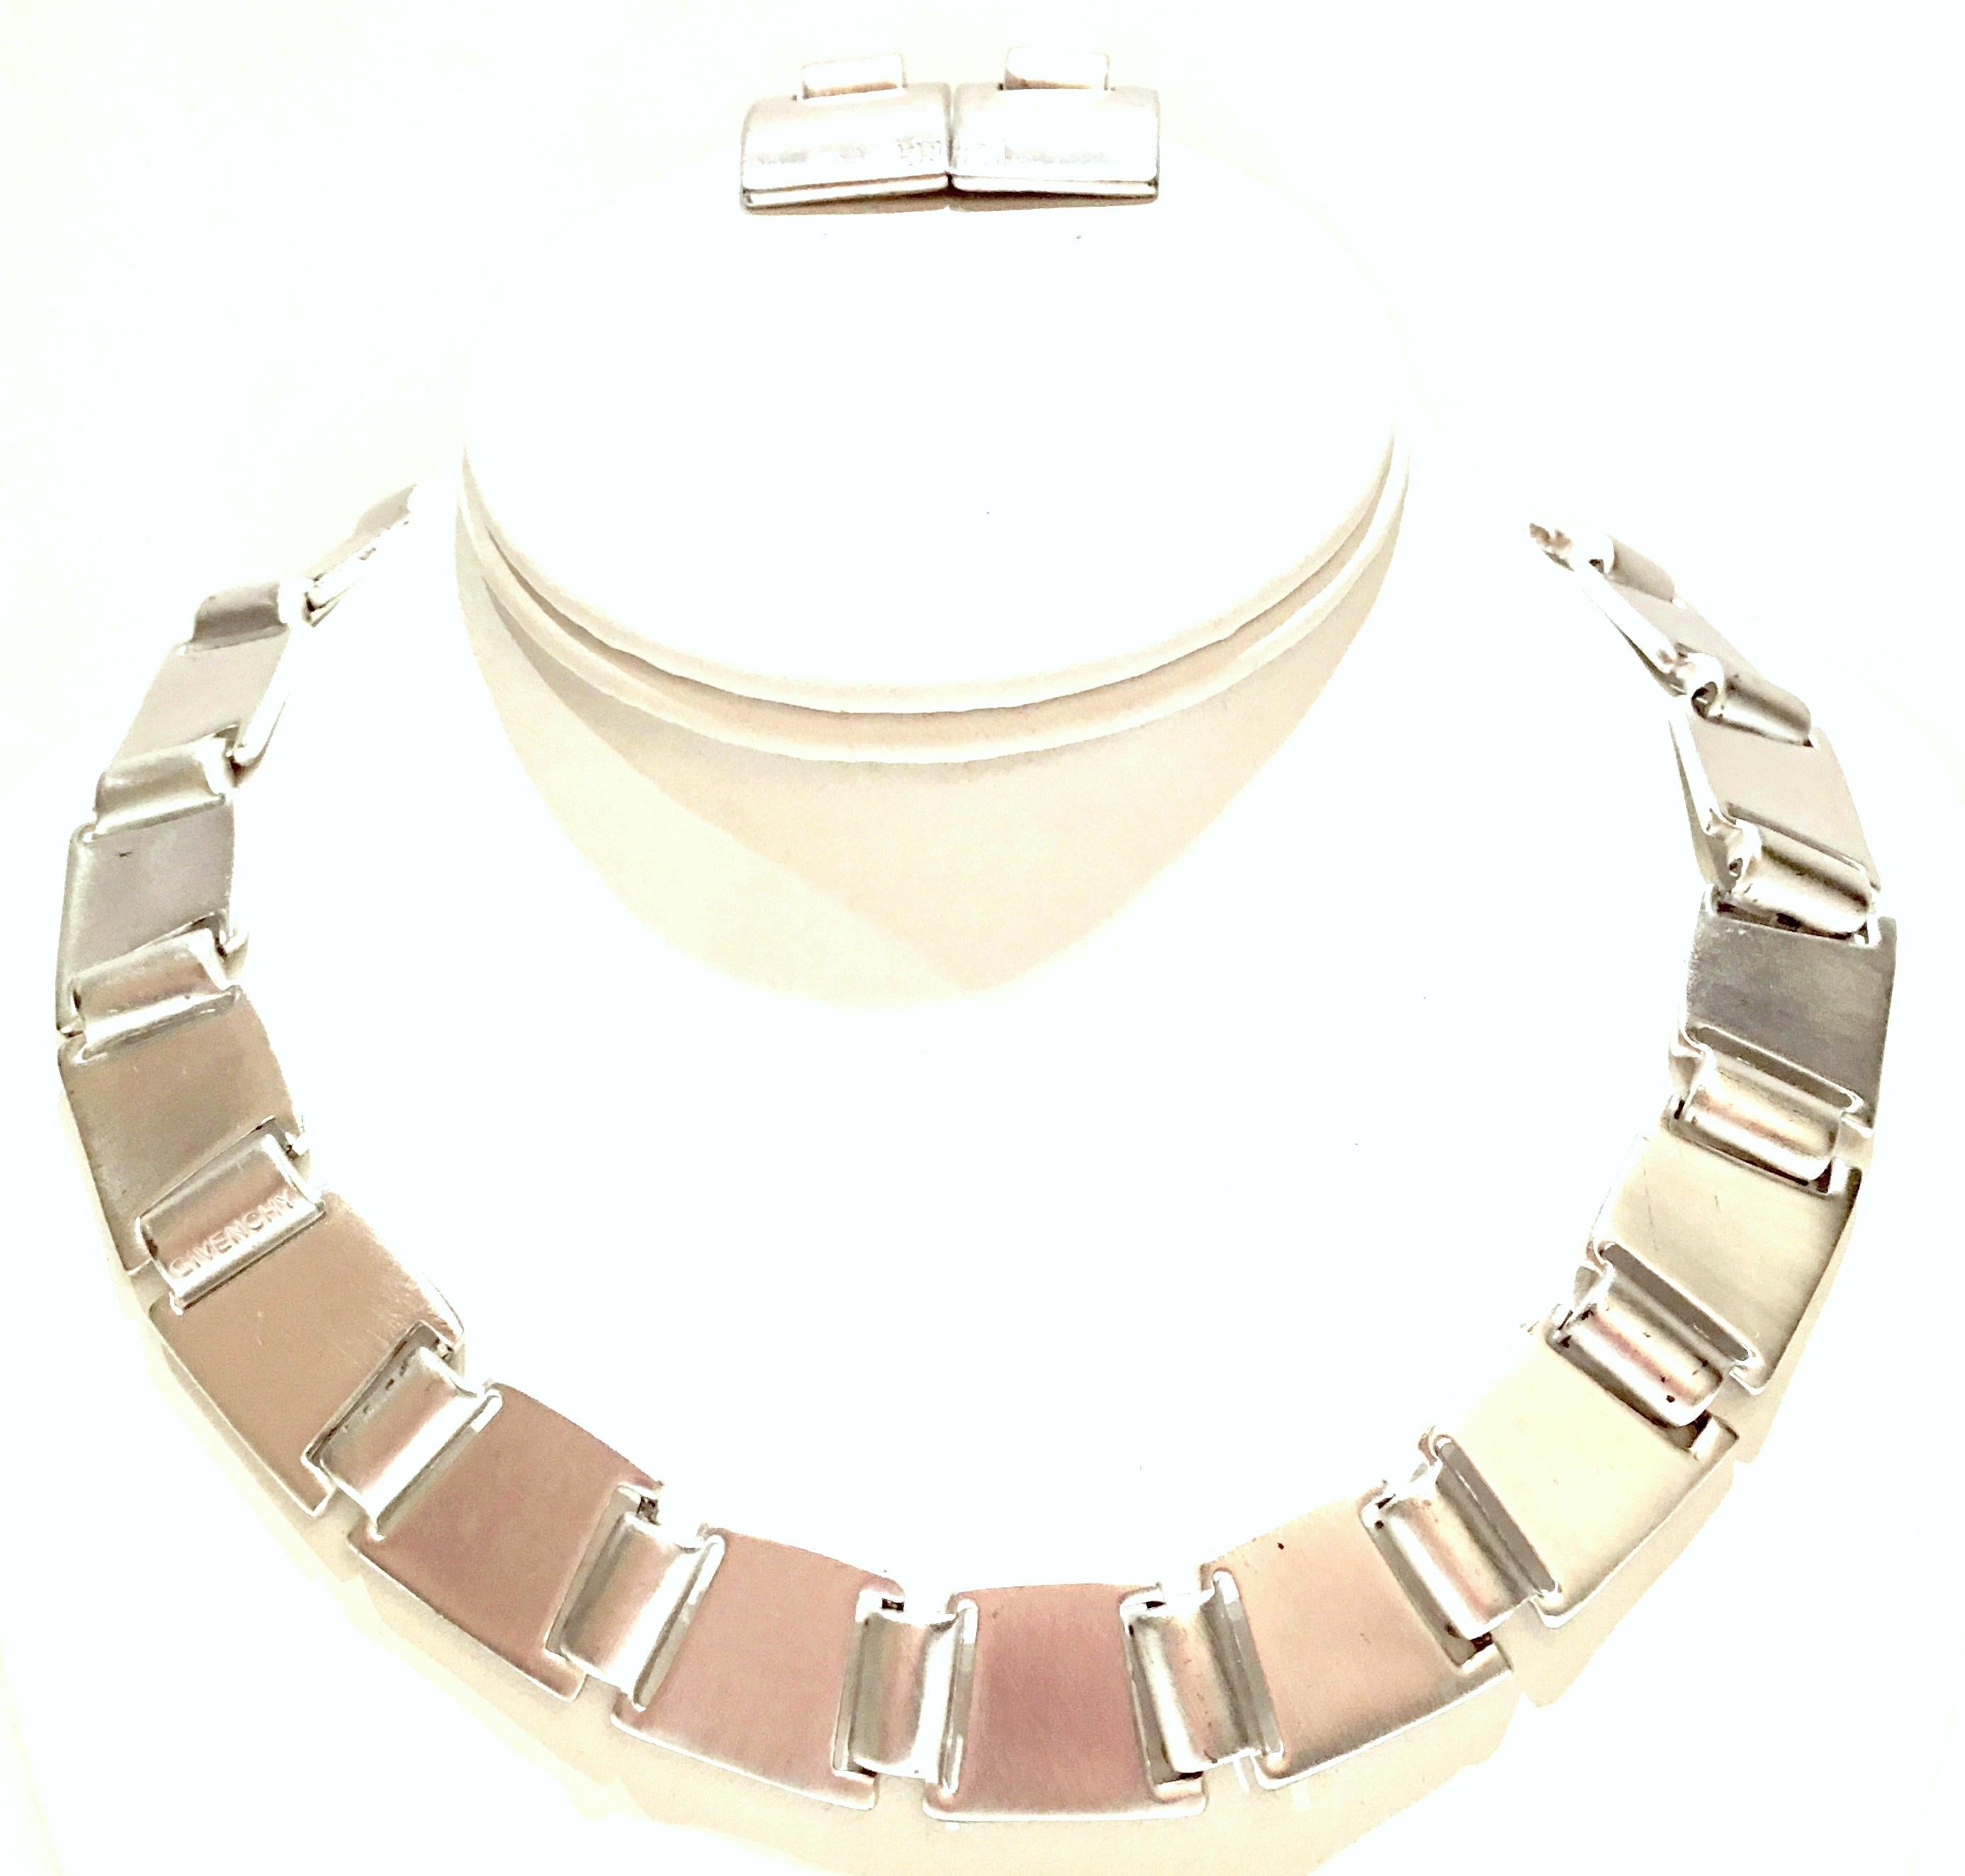 Rare 1990'S Givenchy Modernist signed brushed silver metal square disc link necklace and earrings set. The earrings are pierced back style and feature the Givenchy logo and each piece is signed. The necklace is signed on the underside as well as an